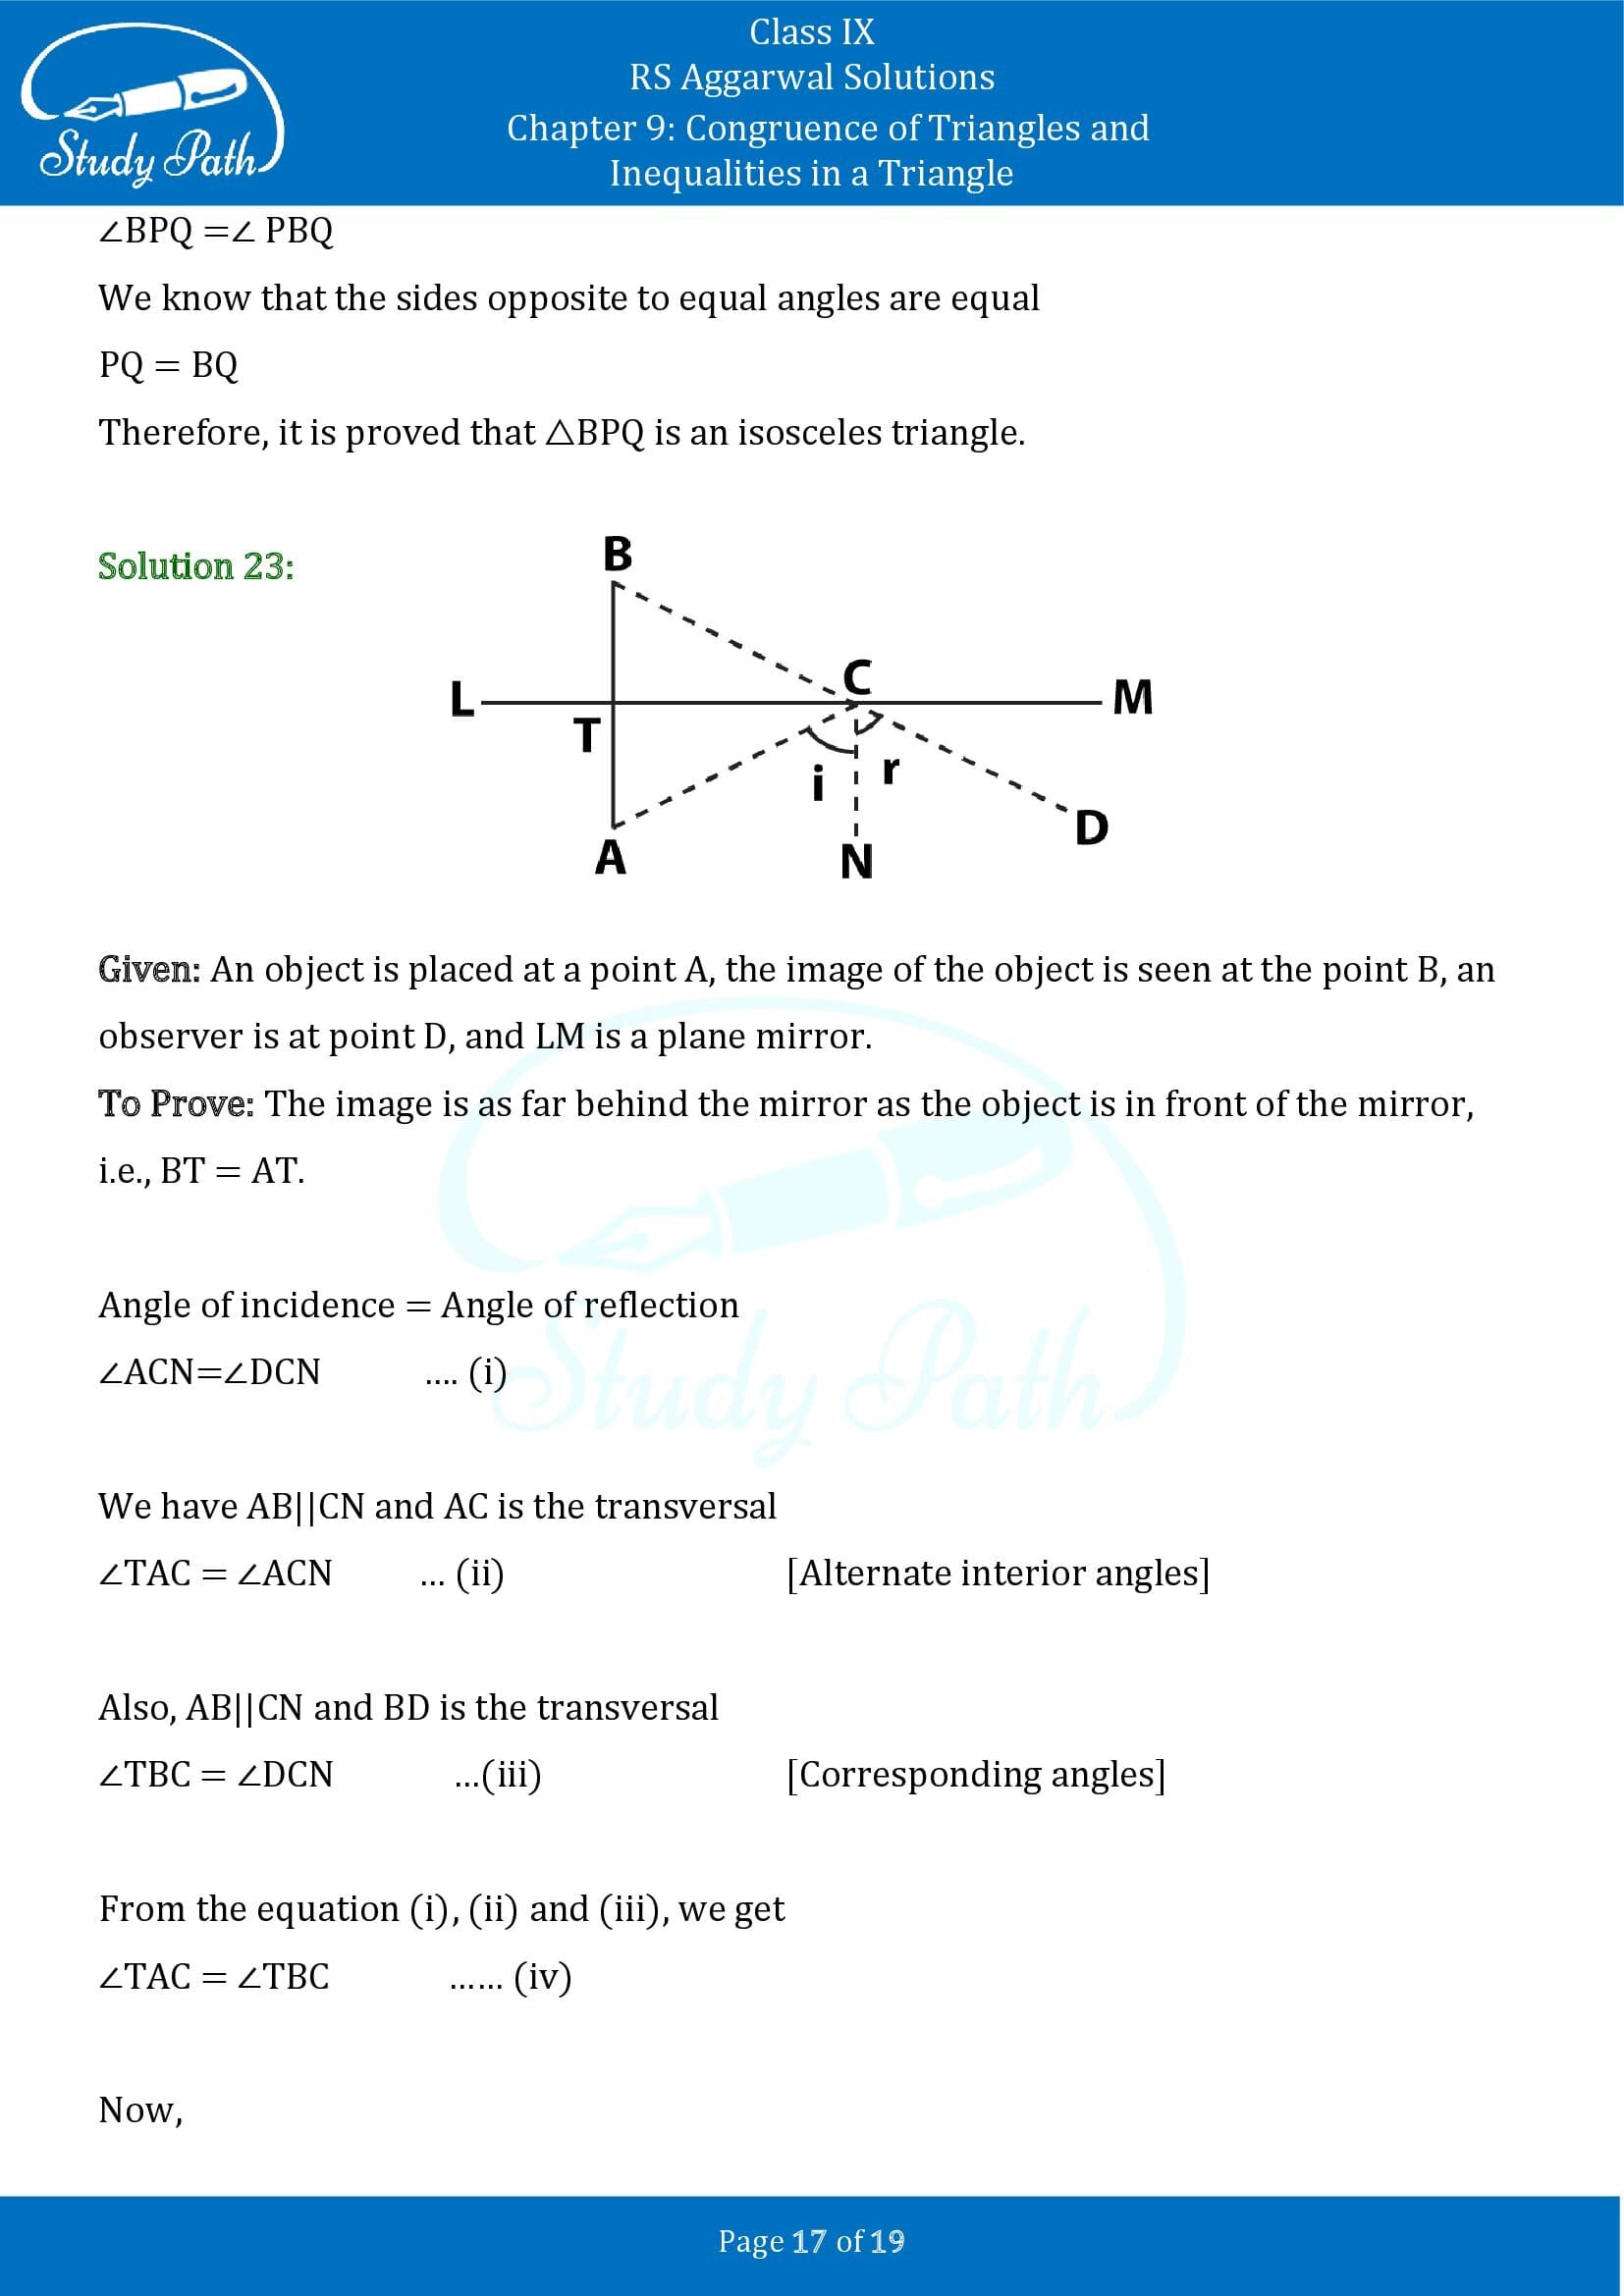 RS Aggarwal Solutions Class 9 Chapter 9 Congruence of Triangles and Inequalities in a Triangle Exercise 9A 0017